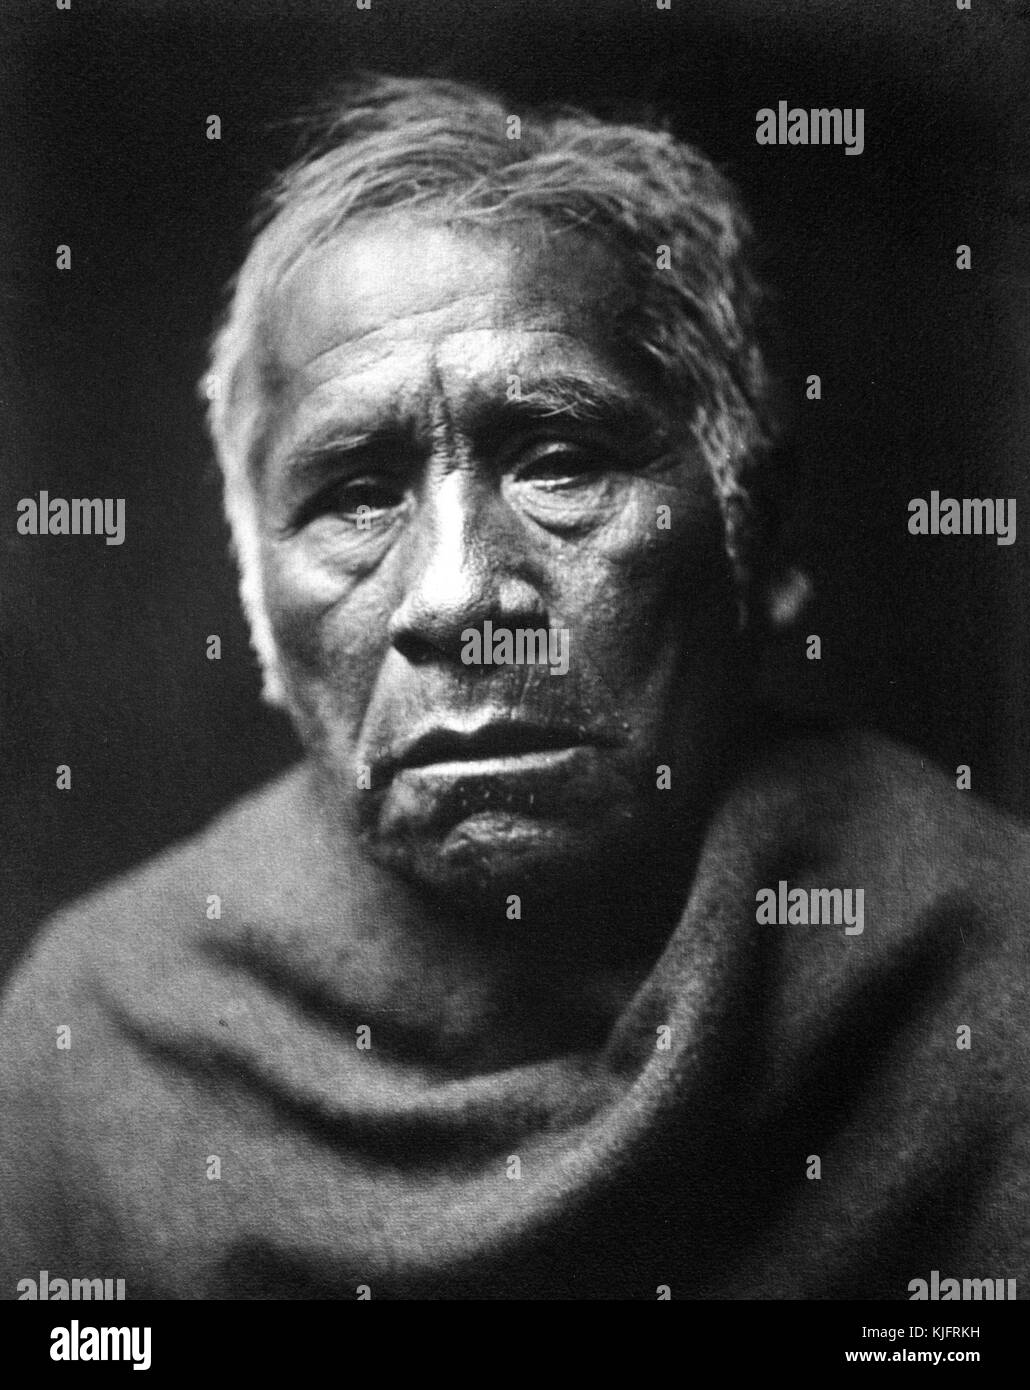 A photographic portrait of a Native American man identified as Captain Charley of Maracopa, he was an older man with greying hair, he was wearing a blanket or wrap around his shoulders for the portrait, 1907. From the New York Public Library. Stock Photo